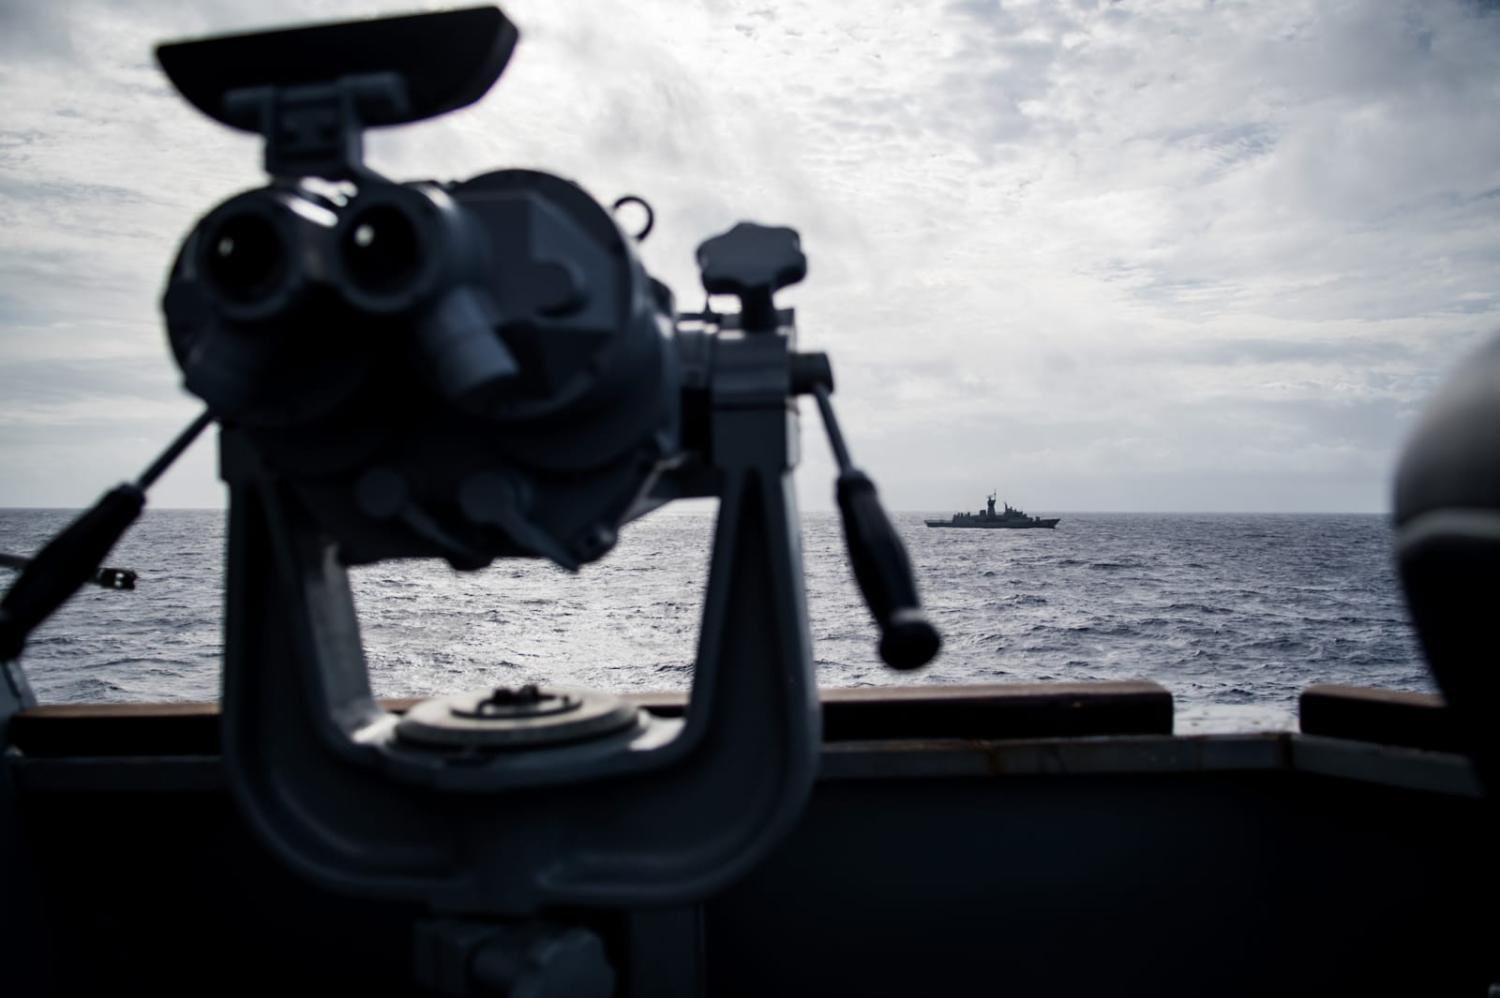 Divers from HMAS Toowoomba, seen here in the distance during 2018 exercises with the US Navy, reportedly received minor injuries last week from a sonar pulse fired by China (Devin M. Langer/US Navy)